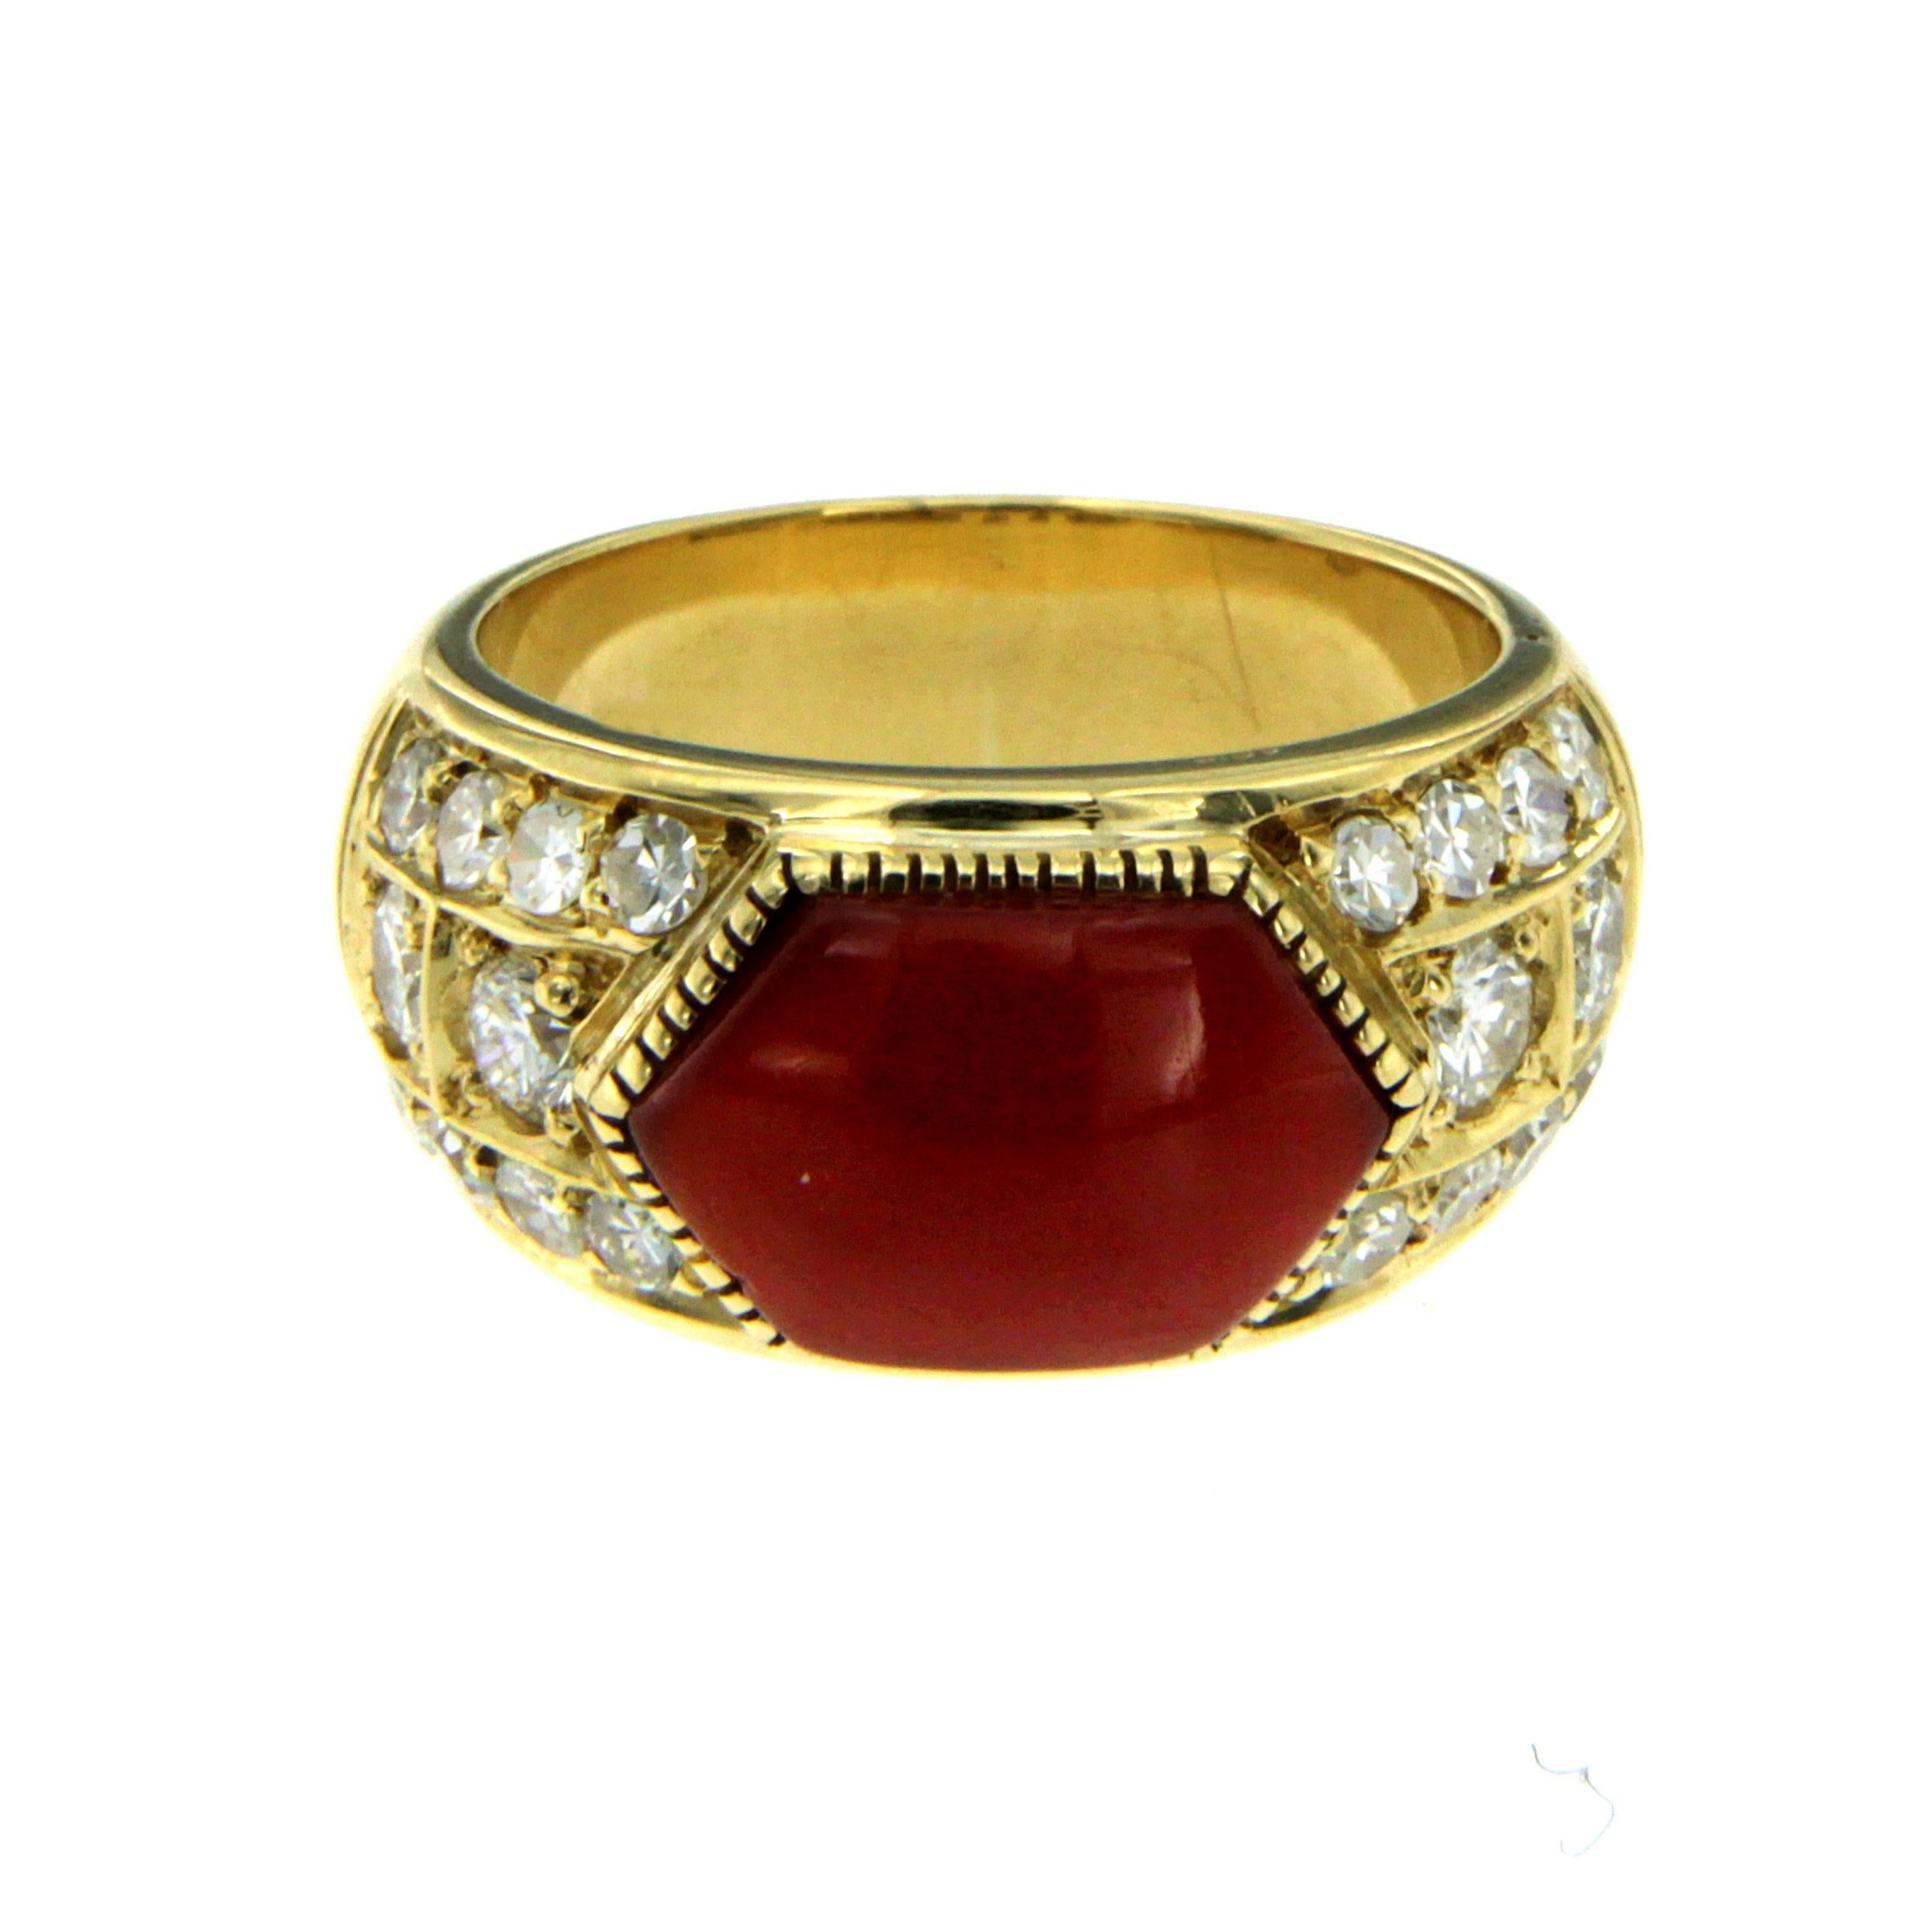 Unique coral and diamond ring featuring a natural Aka Japanese Coral of great quality and 20 round brilliant cut diamonds weighing 0.70 cts. Hand crafted of solid 18k yellow gold. Circa 1940

CONDITION: Pre-owned - Excellent 
METAL: 18k Gold 
STONE: